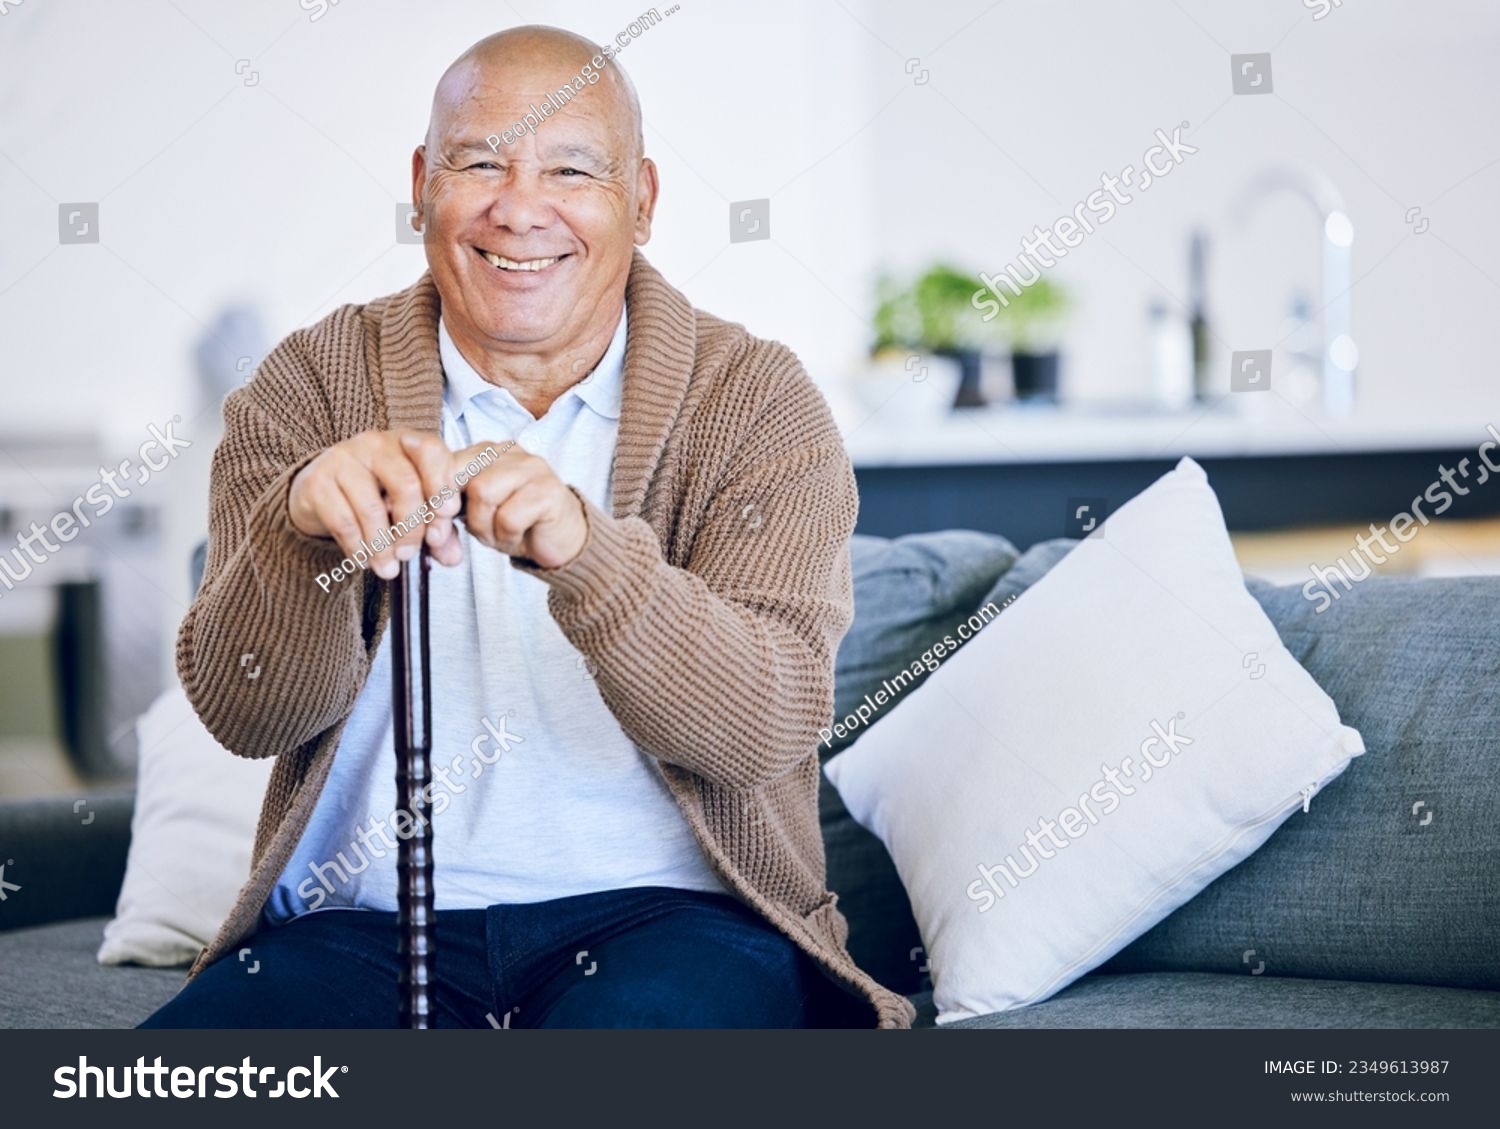 Portrait, home and old man with a smile, walking stick and relax with retirement, peace and calm on a couch. Senior person in a living room, elder or pensioner on a sofa, cane or support with health #2349613987